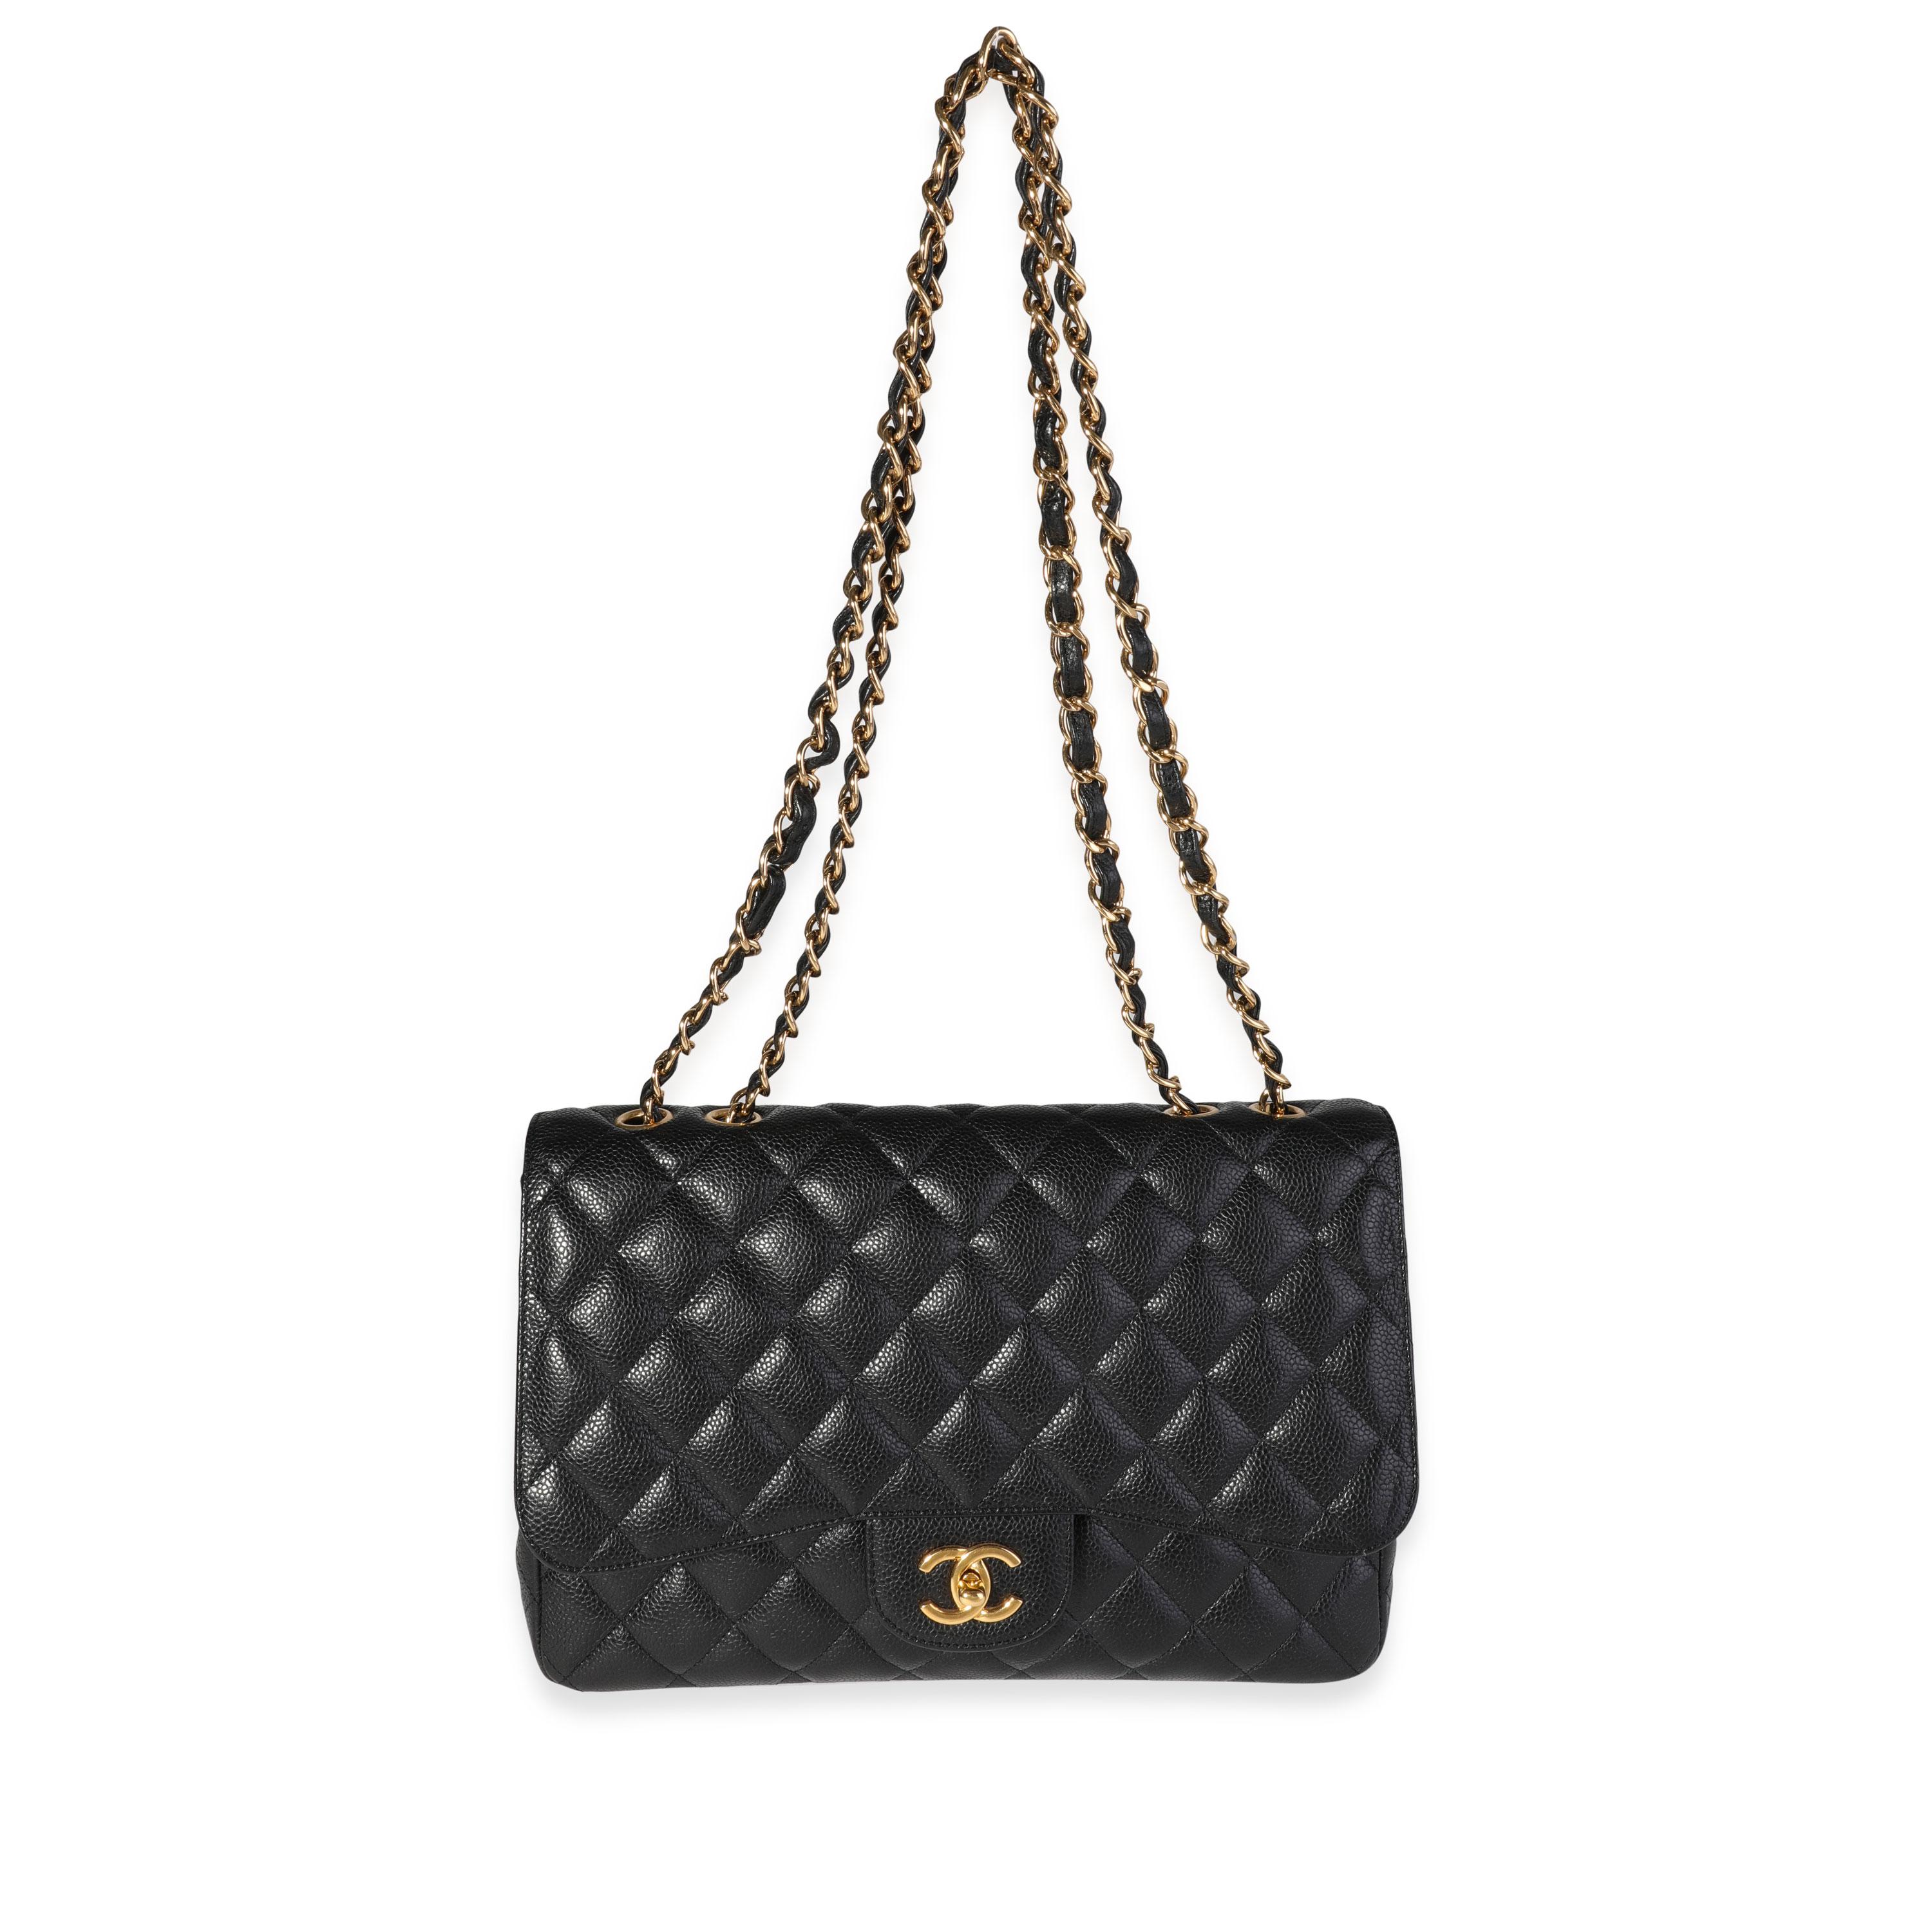 Listing Title: Chanel Black Quilted Caviar Jumbo Classic Single Flap Bag
SKU: 119034
MSRP: 9500.00
Condition: Pre-owned (3000)
Handbag Condition: Very Good
Condition Comments: Scratches to hardware. Wear to interior.
Brand: Chanel
Model: Classic